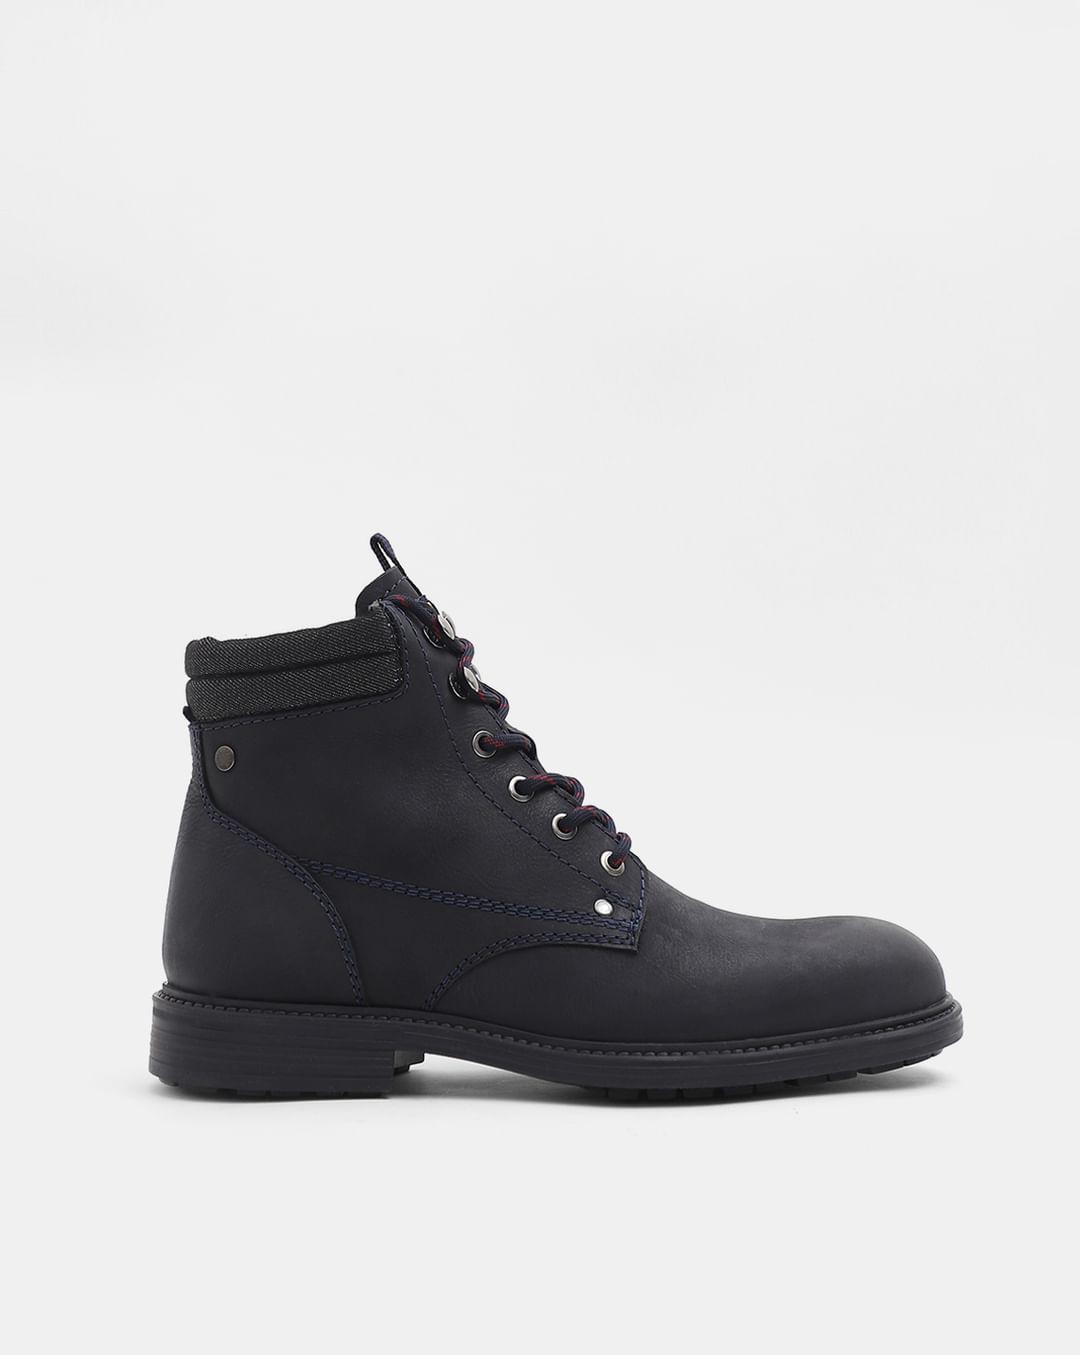 navy-blue-premium-leather-boots